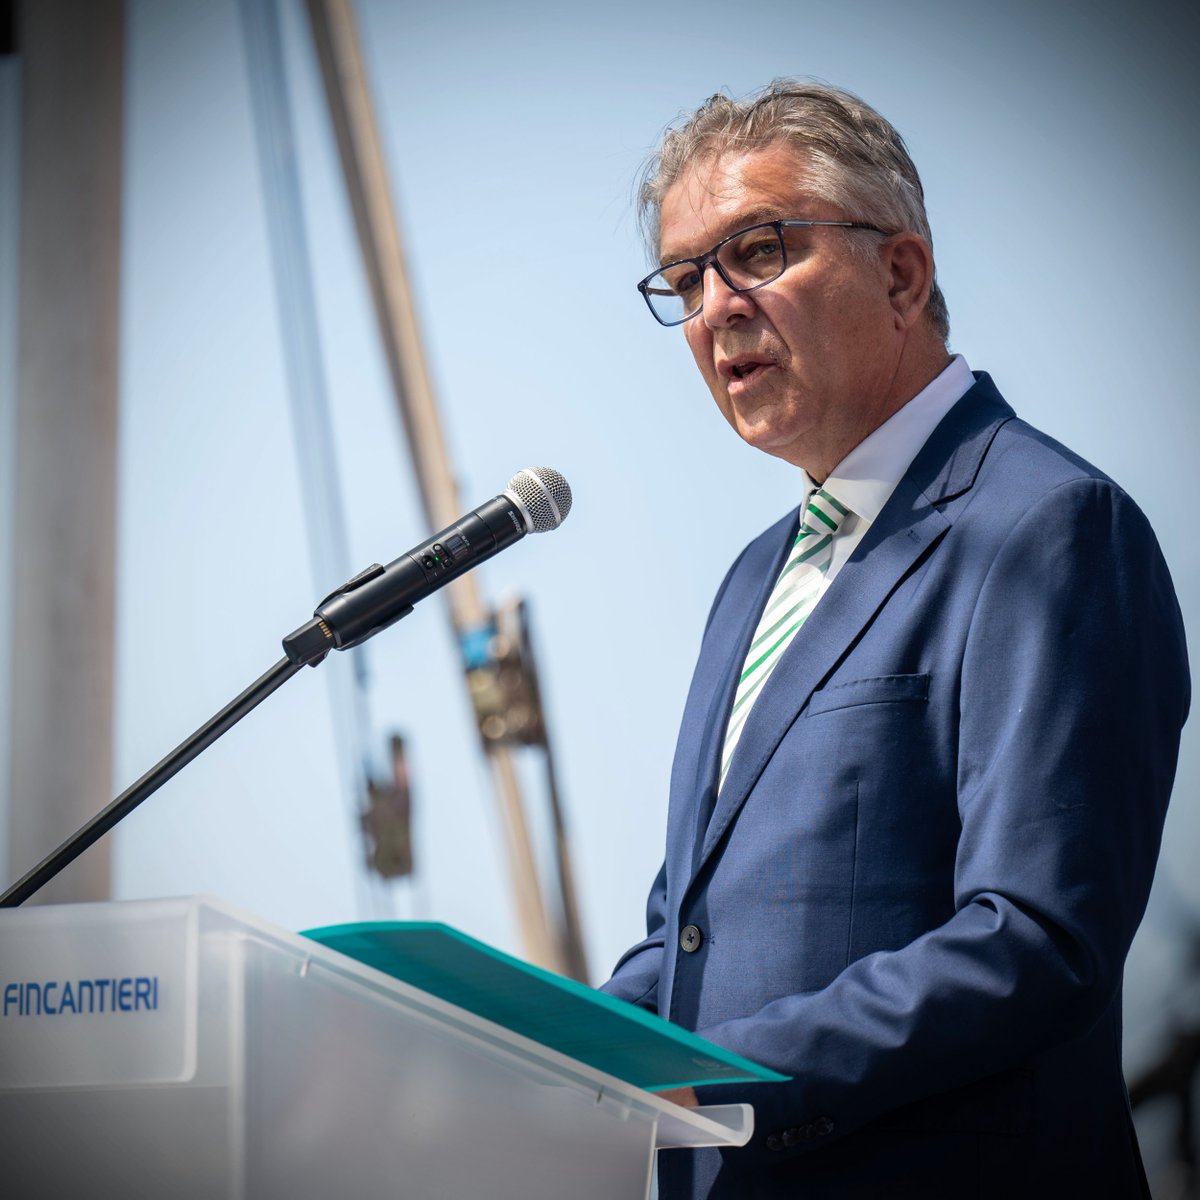 There was great satisfaction today at our Riva Trigoso shipyard for the launching ceremony of the frigate 'Emilio Bianchi', the last in a series of 10 #FREMM units commissioned by the Italian Navy under the French-Italian international cooperation agreement, and under the